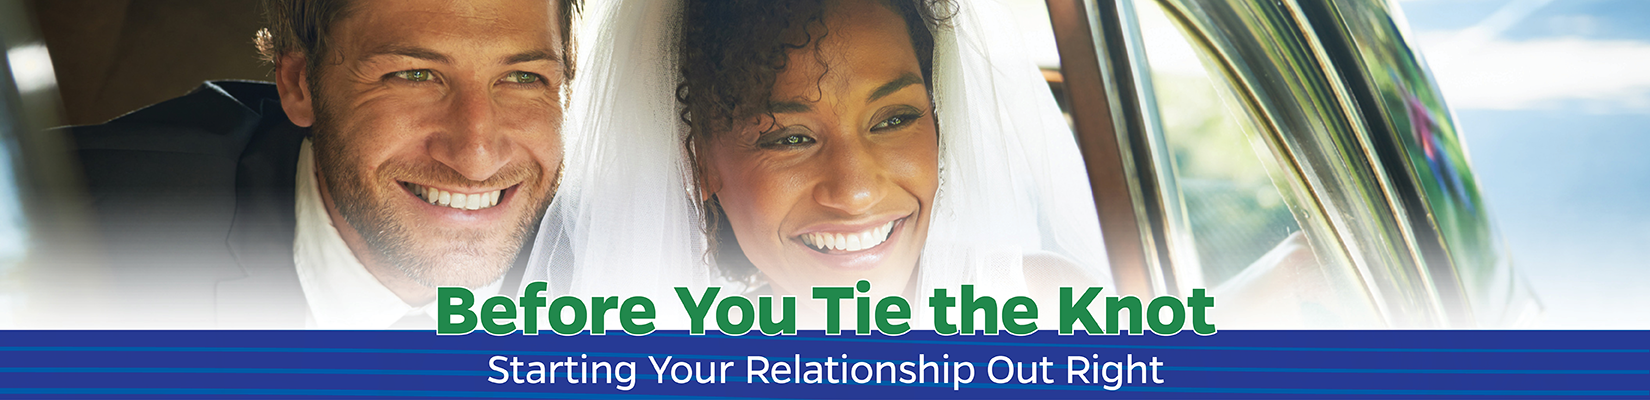 Before You Tie The Knot: Starting Your Relationship Right